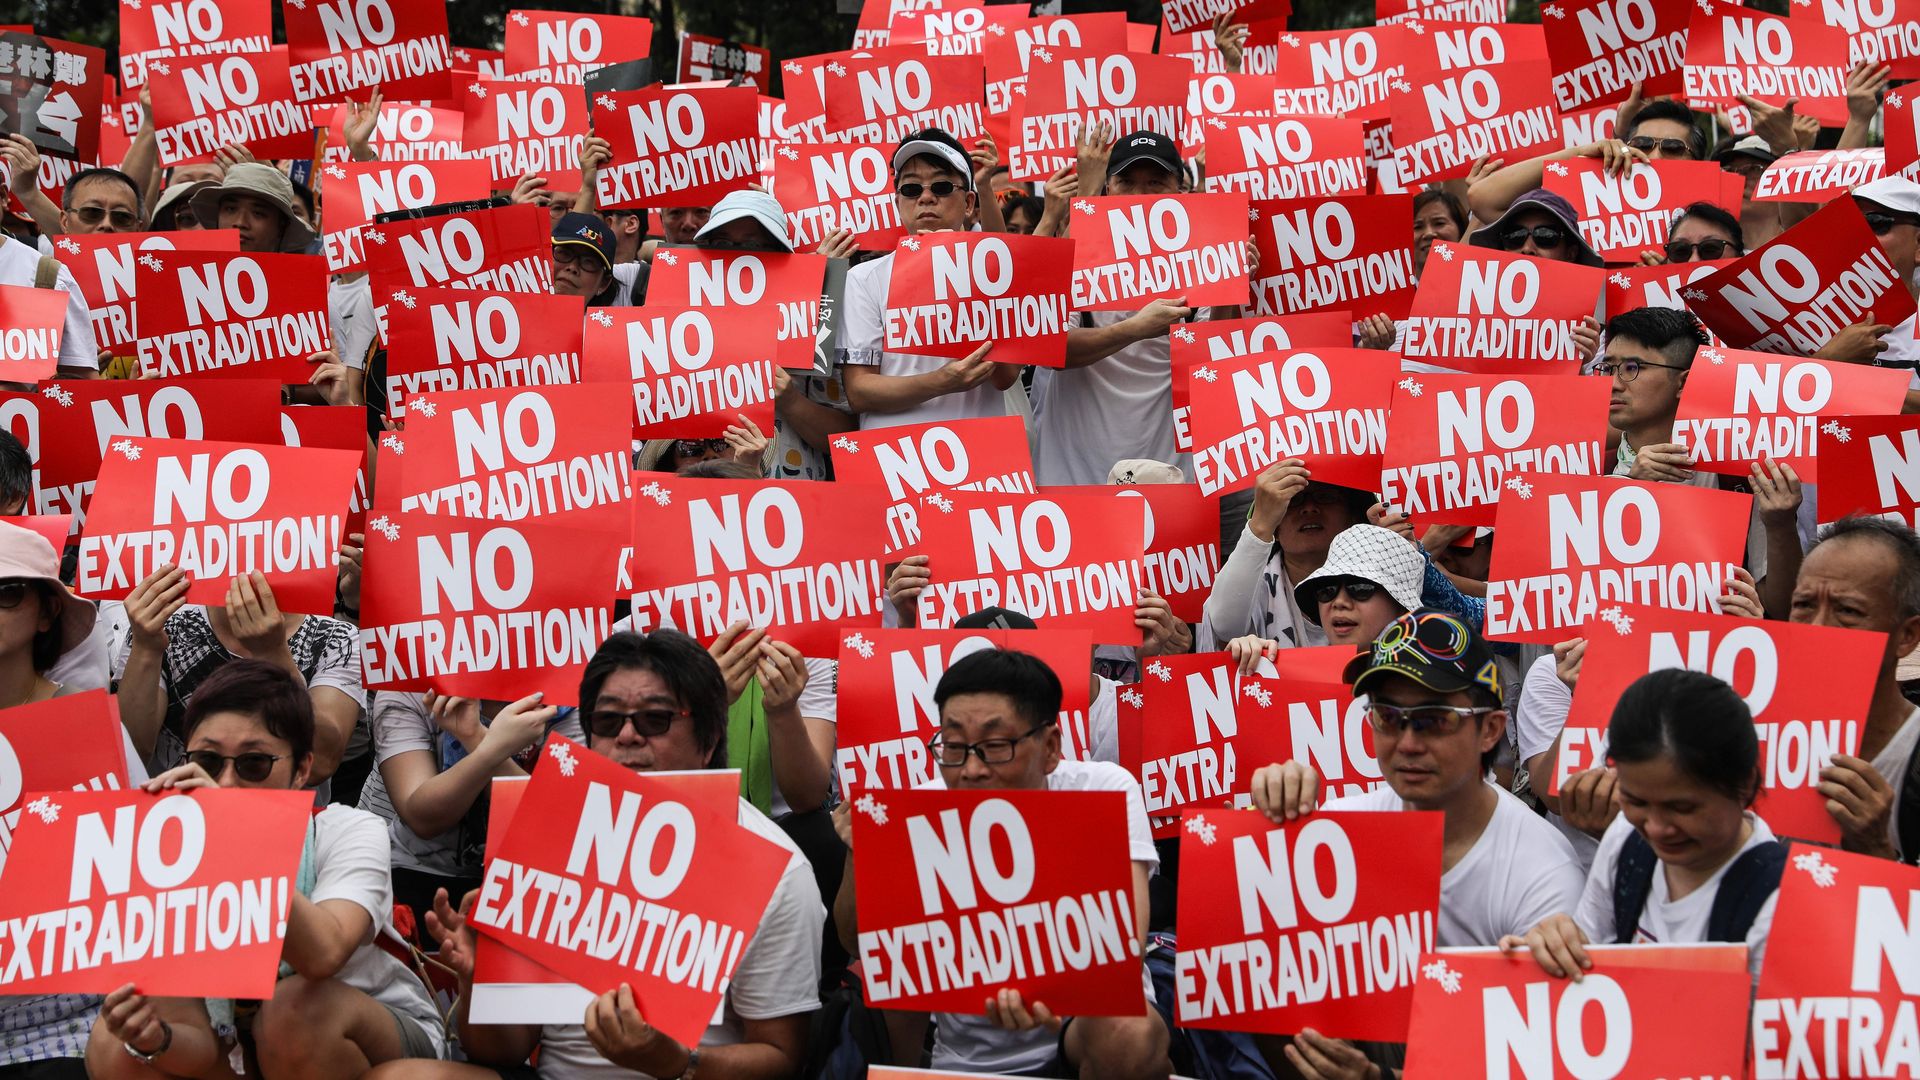 Protesters attend a rally against a controversial extradition law proposal in Hong Kong on June 9, 2019.